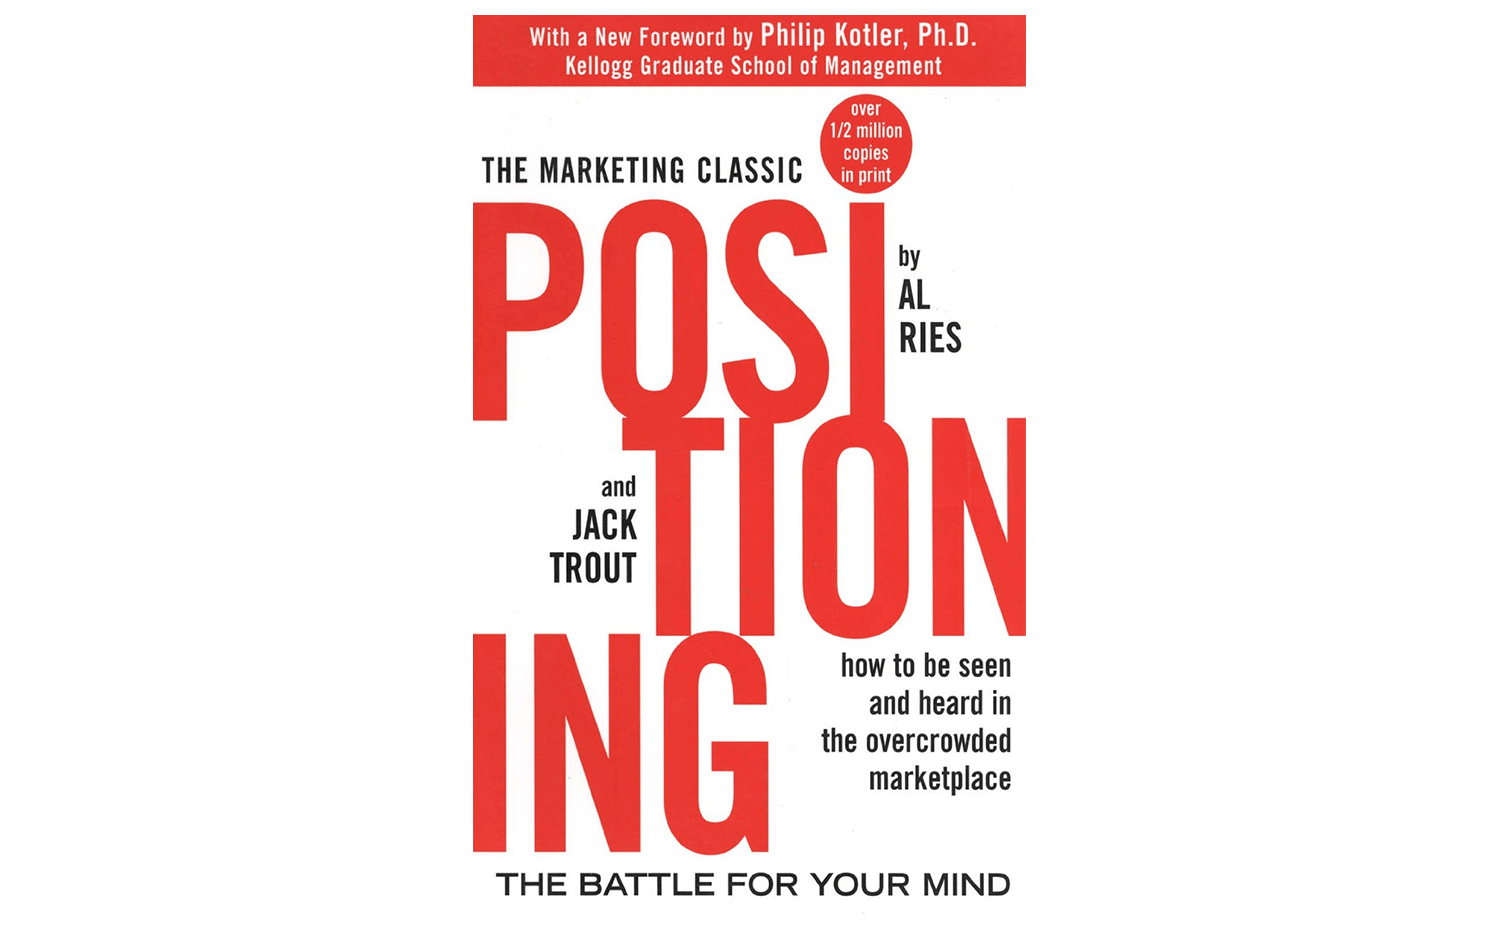 Positioning - best small business marketing book for branding and customer relations